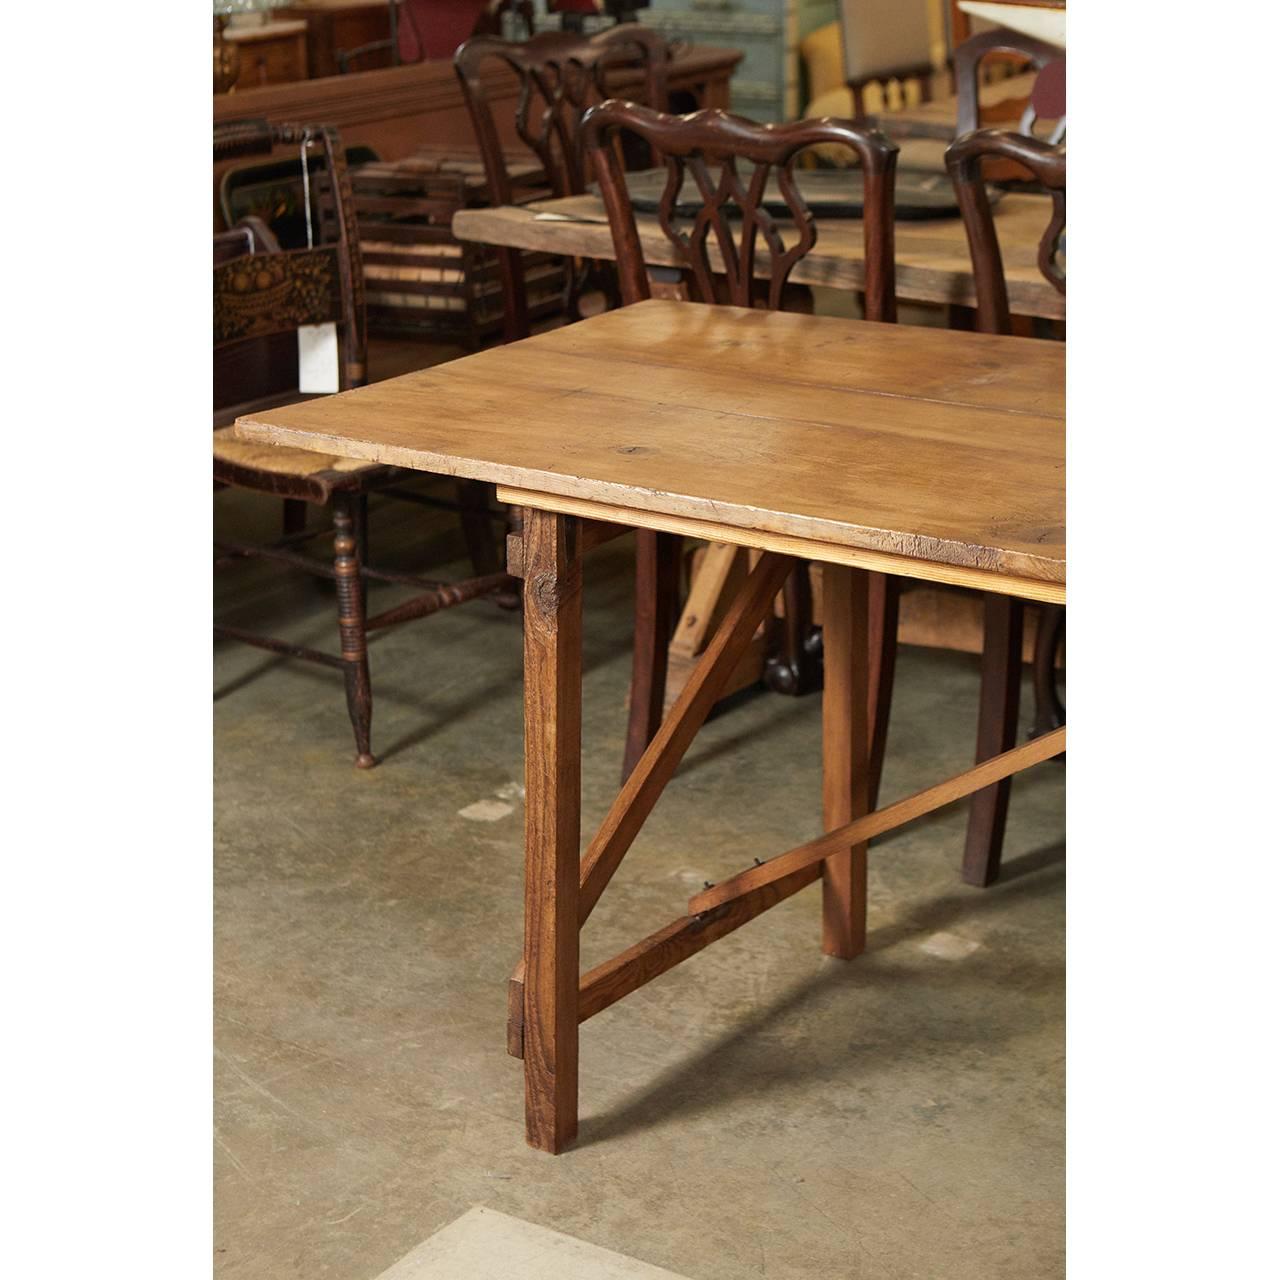 This striking piece is a wallpaper table with centre supports that unhook from the table top to allow the legs to fold inward. The piece has simple striking lines and would work great as a dining or work table.
  